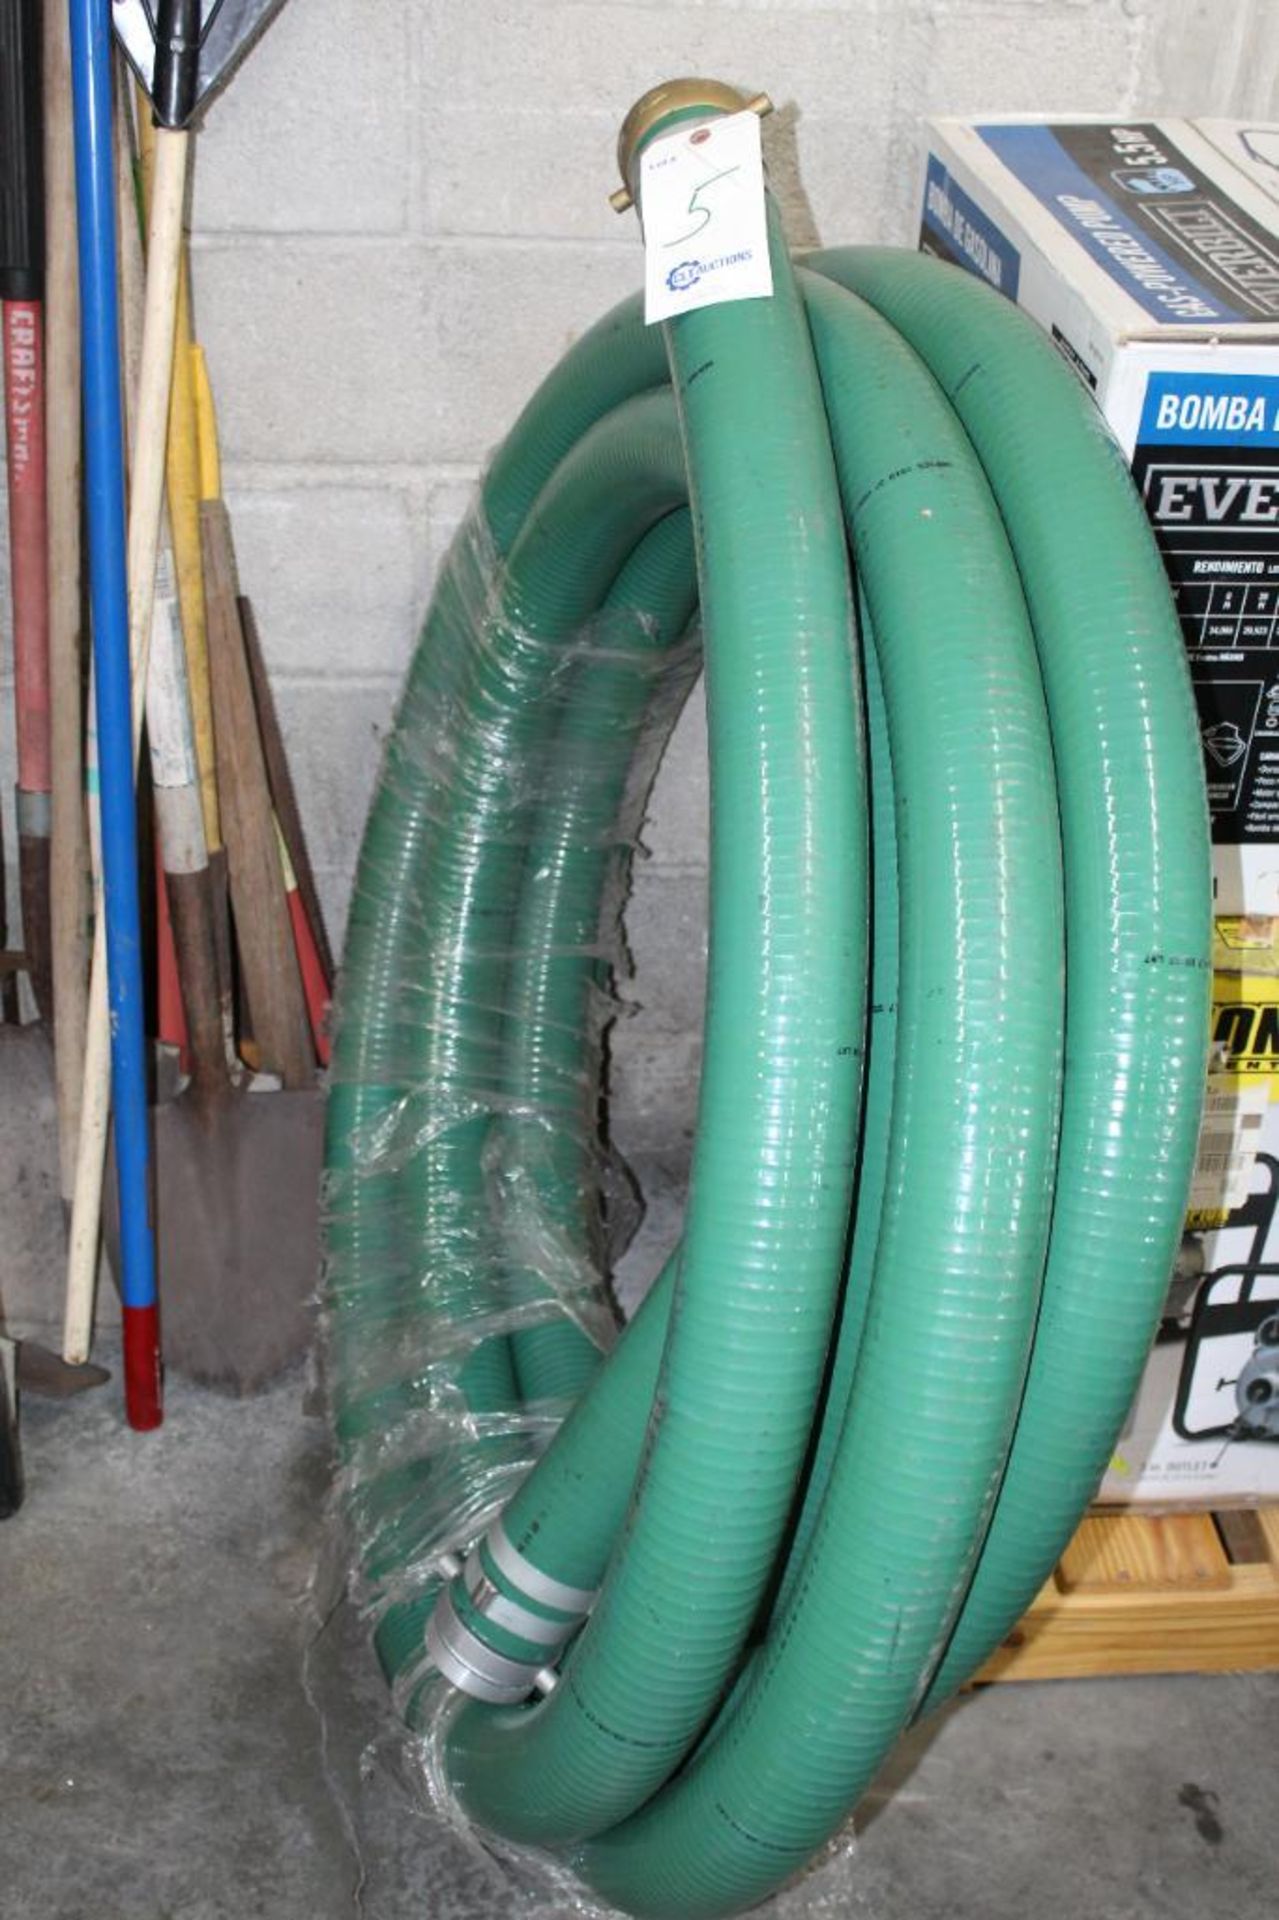 20 foot suction hose - new